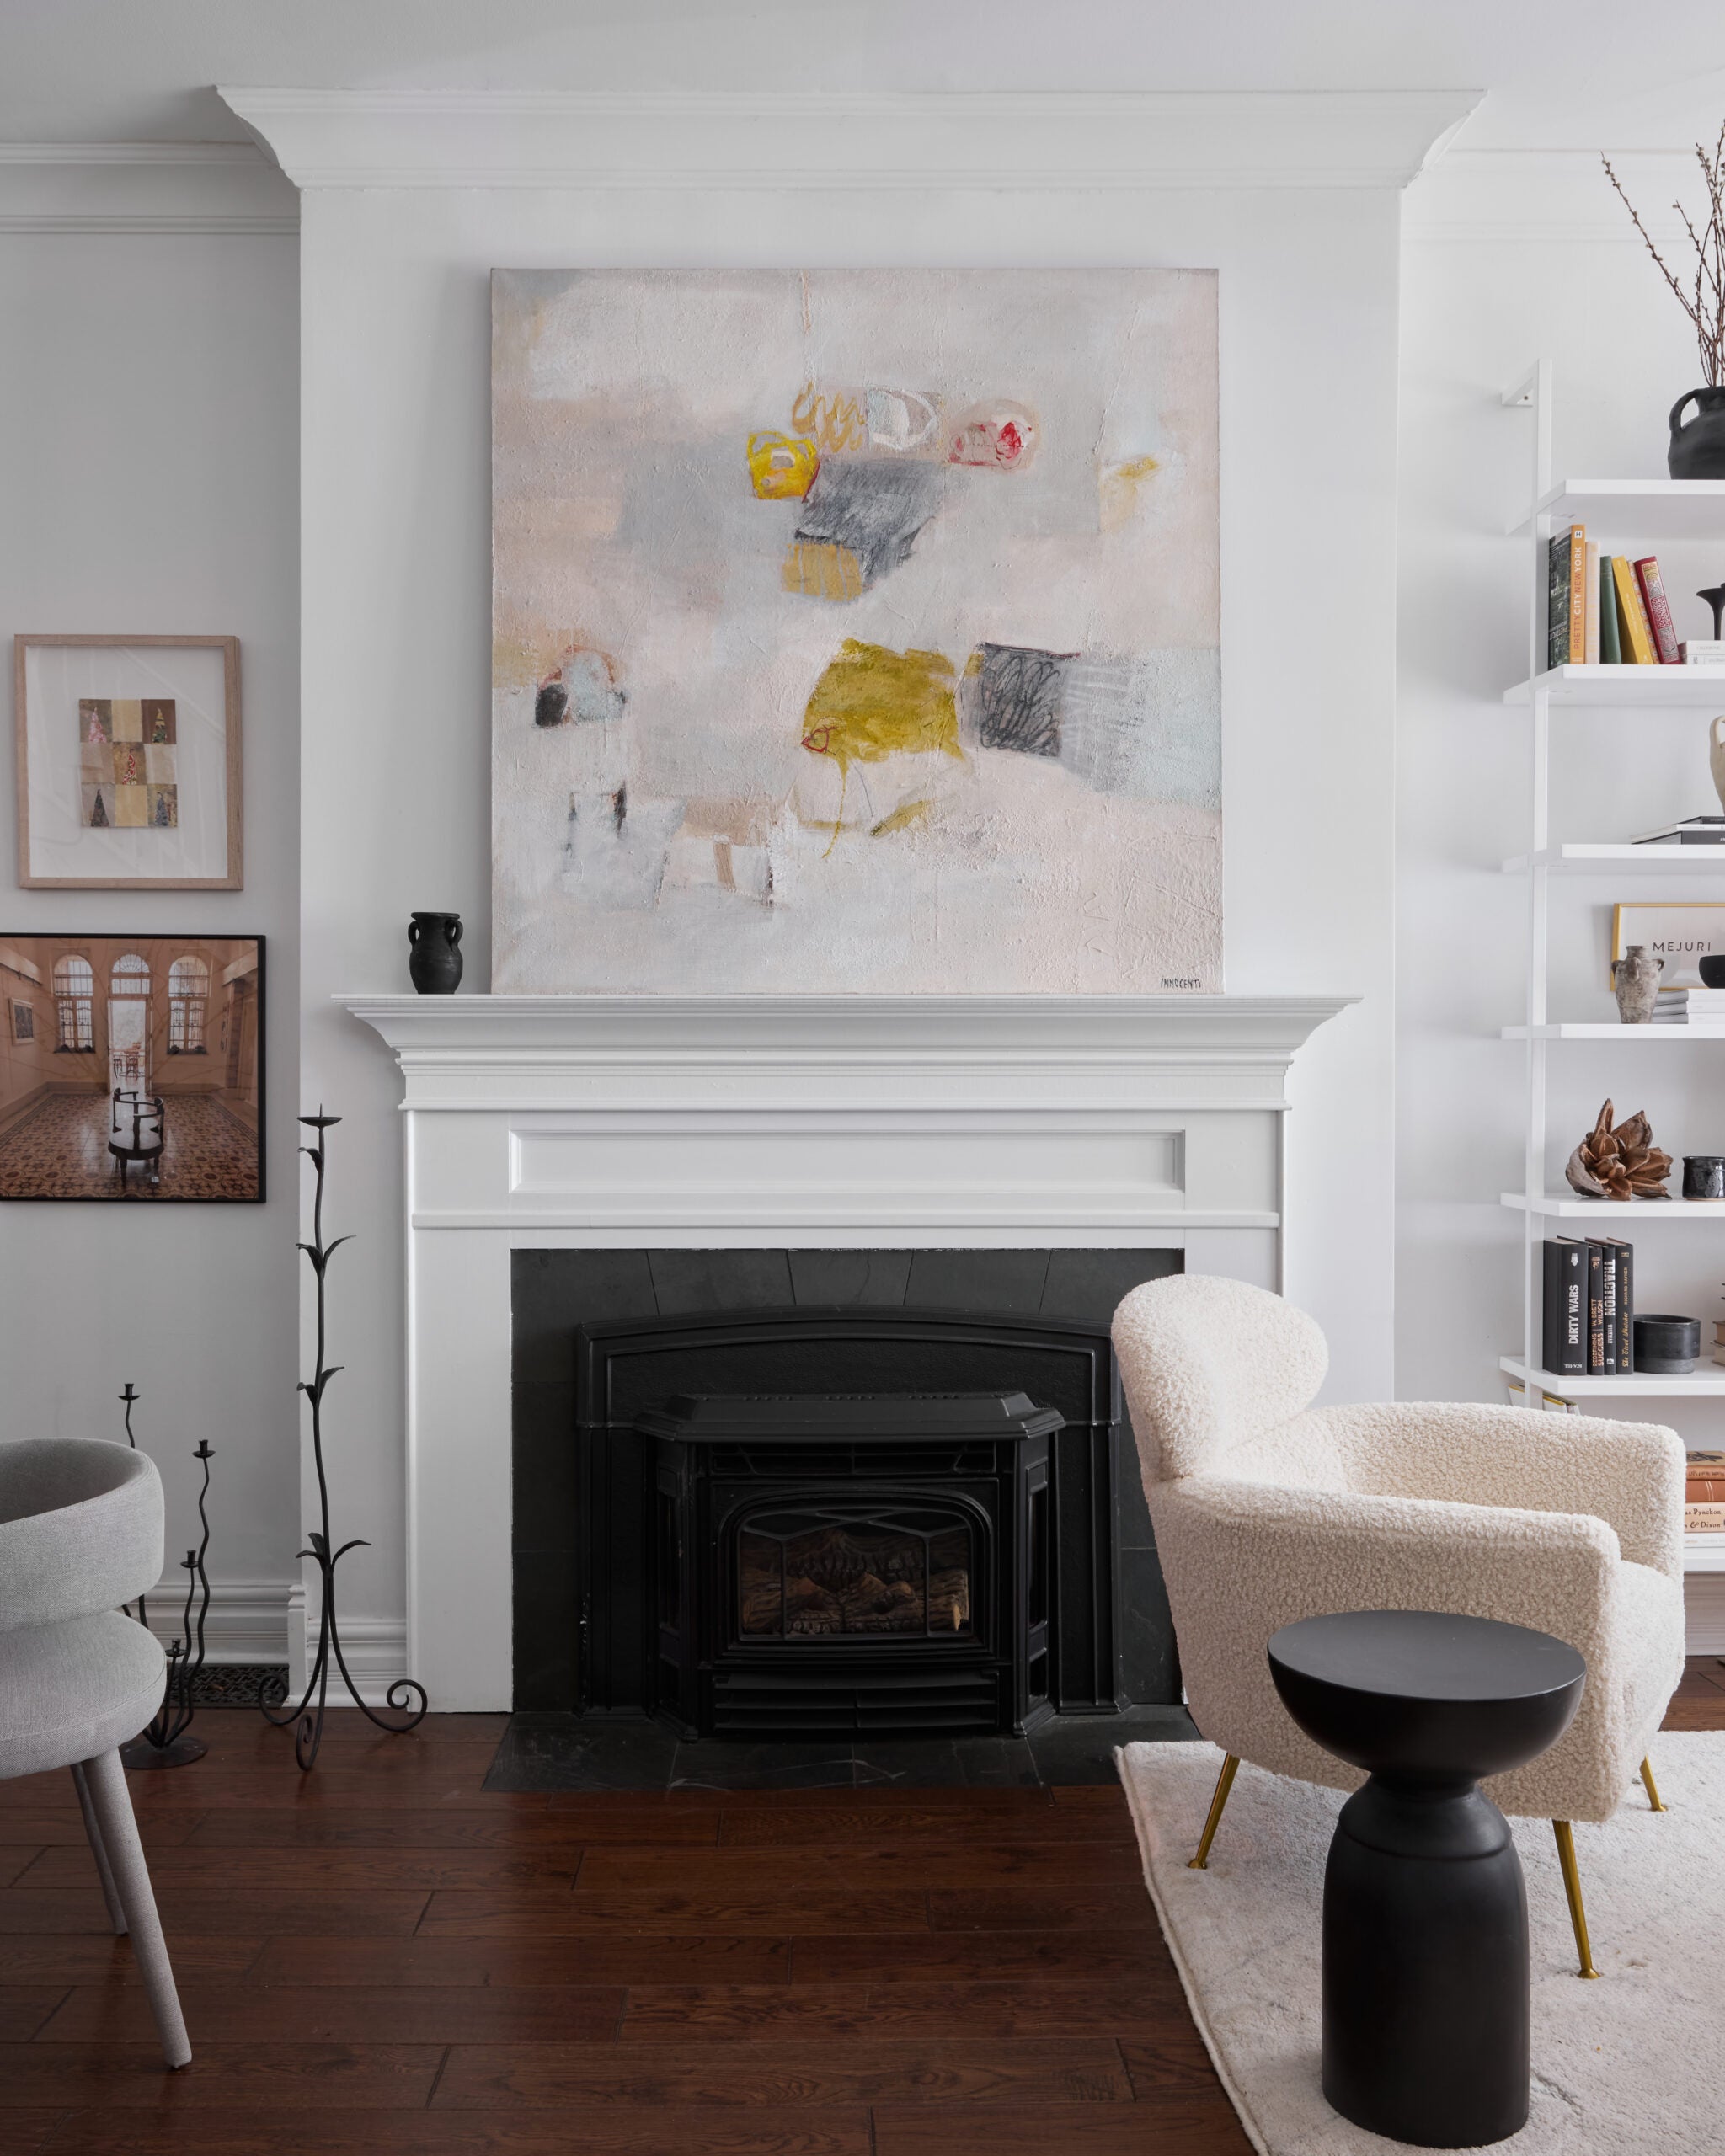 abstract art over fireplace